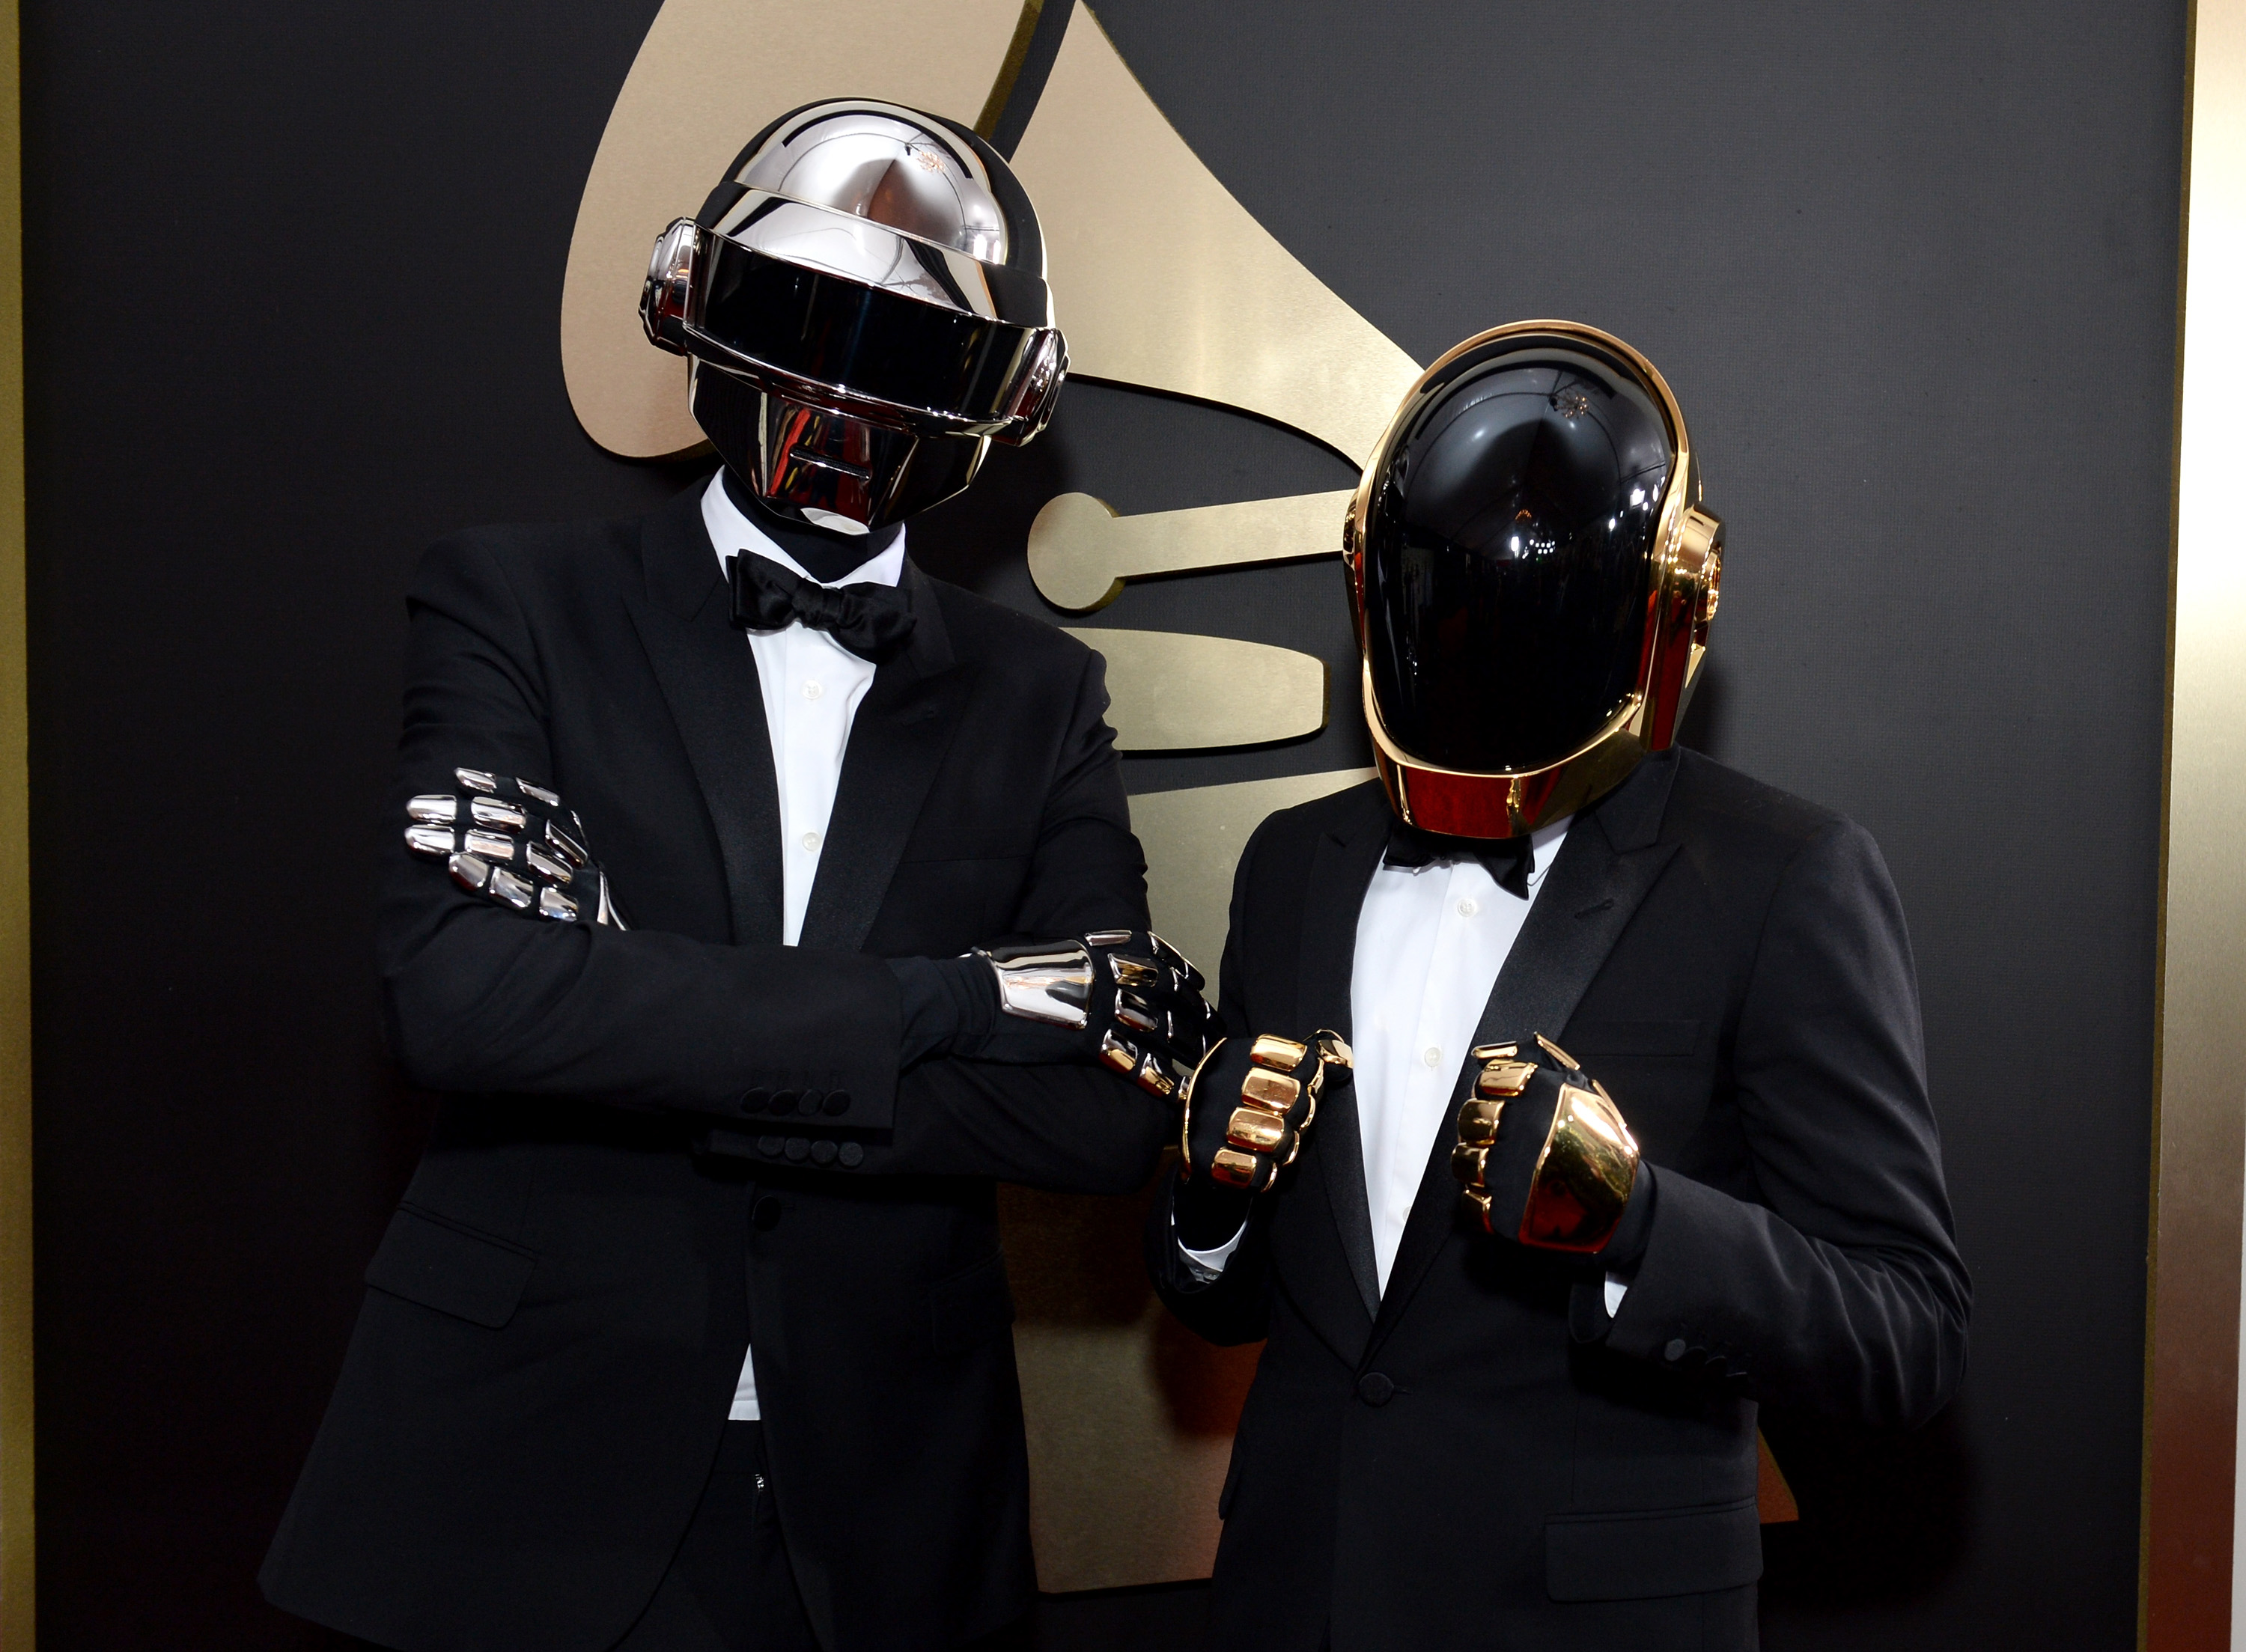 Daft Punk attends the 56th GRAMMY Awards at Staples Center on January 26, 2014 in Los Angeles, California. (Michael Kovac / WireImage)